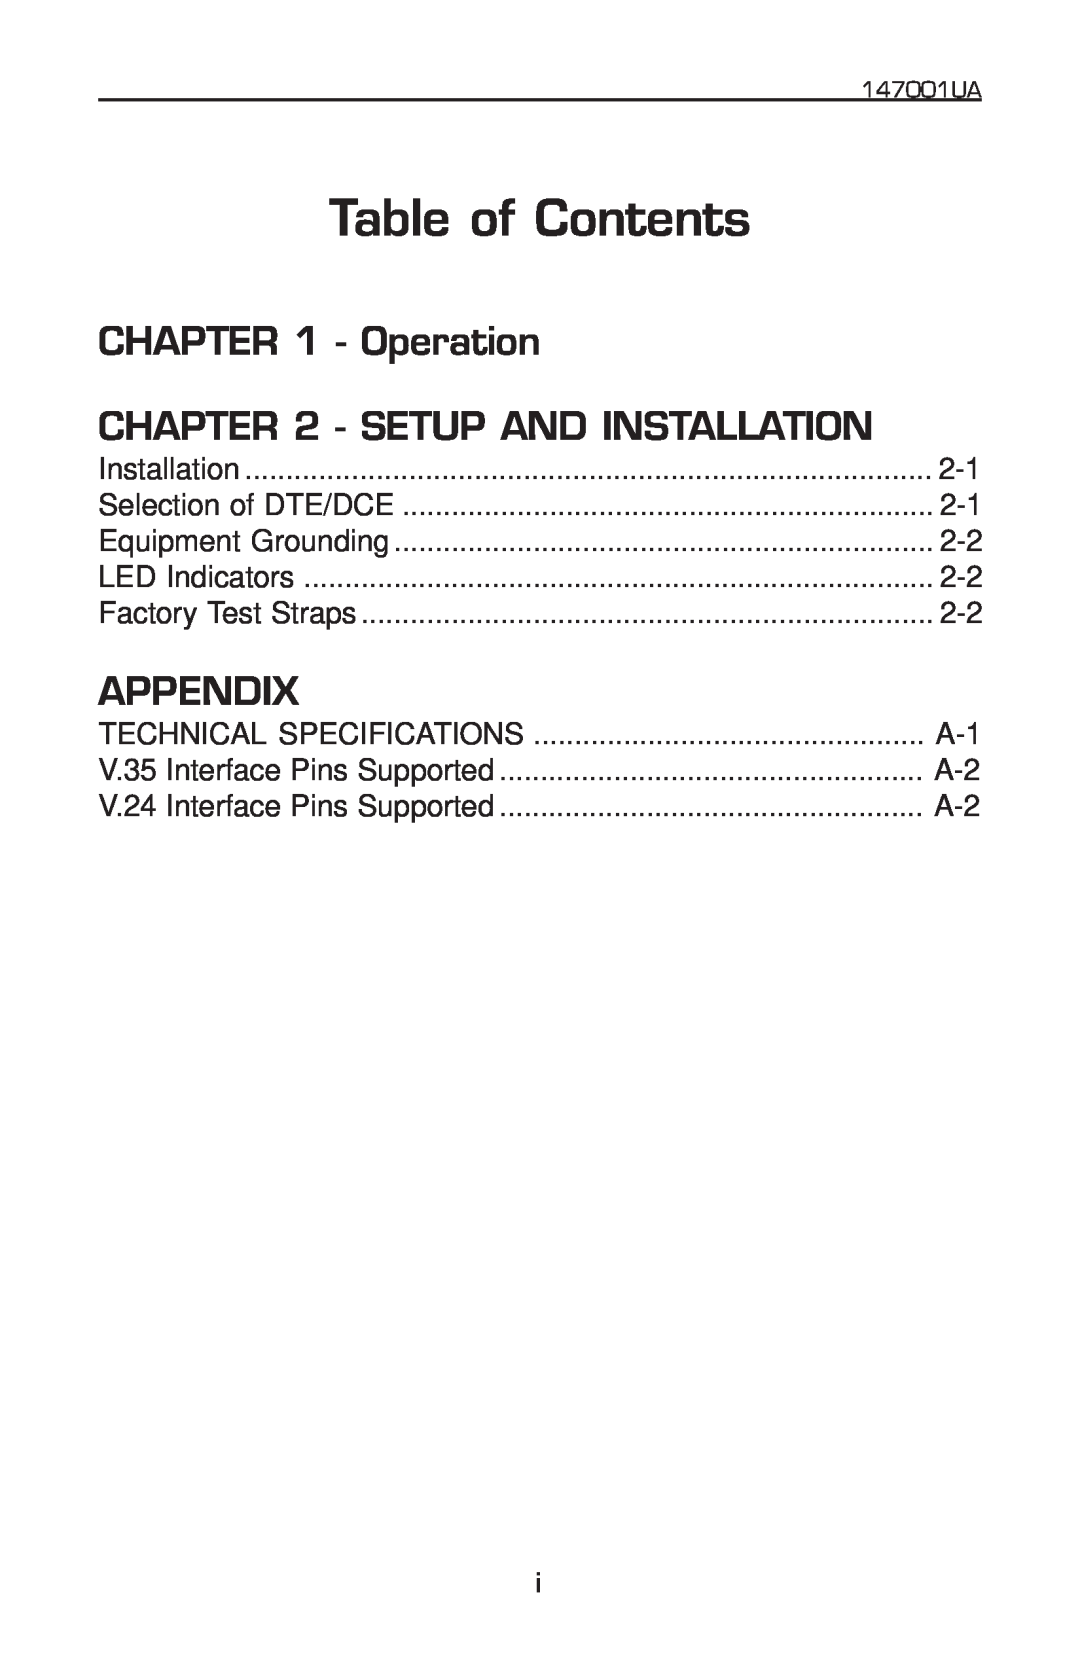 Patton electronic 2020P manual Operation - SETUP AND INSTALLATION, Appendix, Table of Contents 